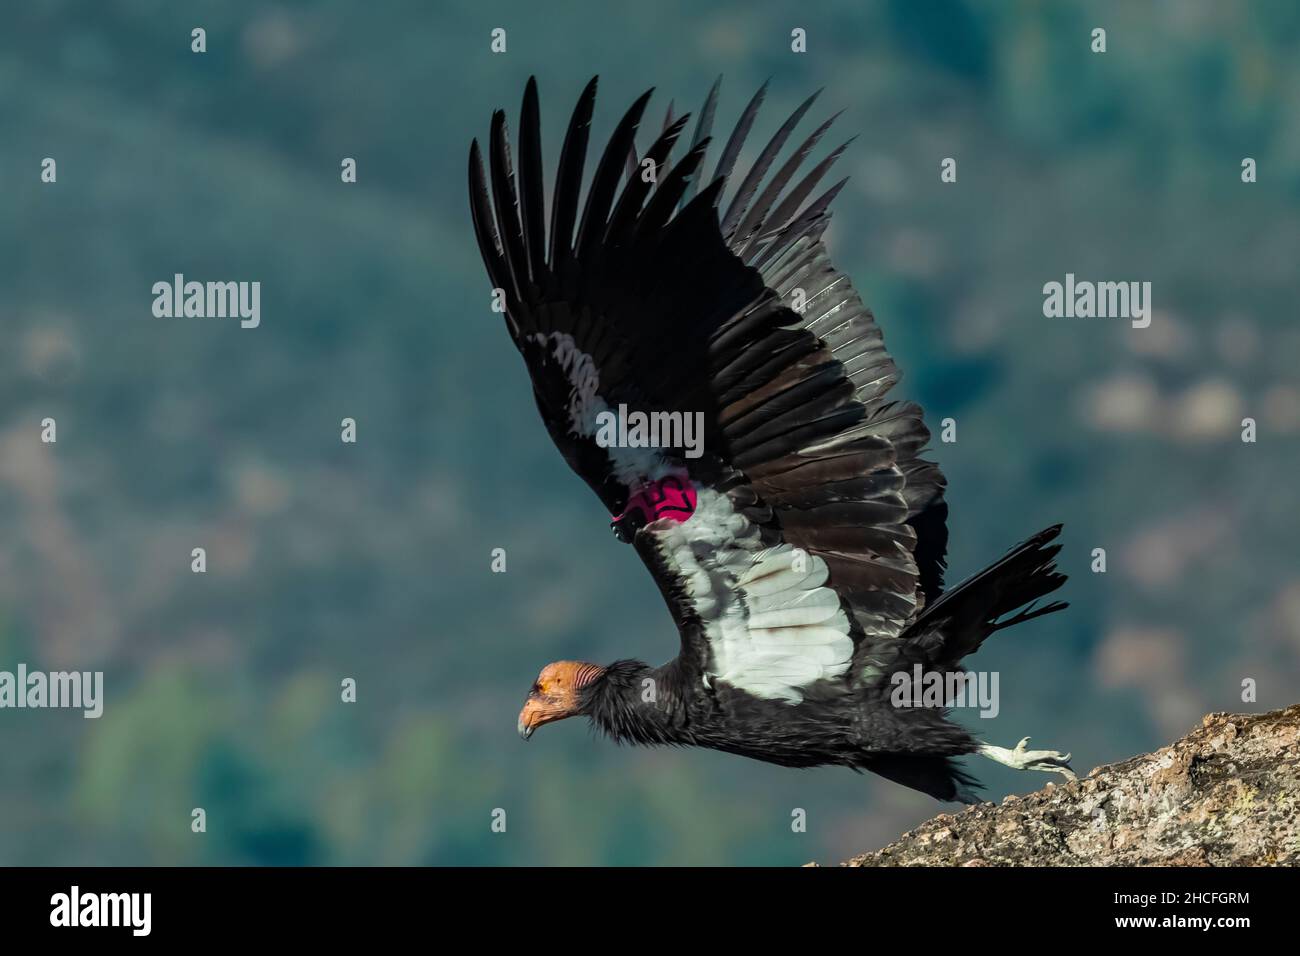 California Condor, Gymnogyps californianus, #25 taking off from a boulder in the High Peaks of Pinnacles National Park, California, USA Stock Photo